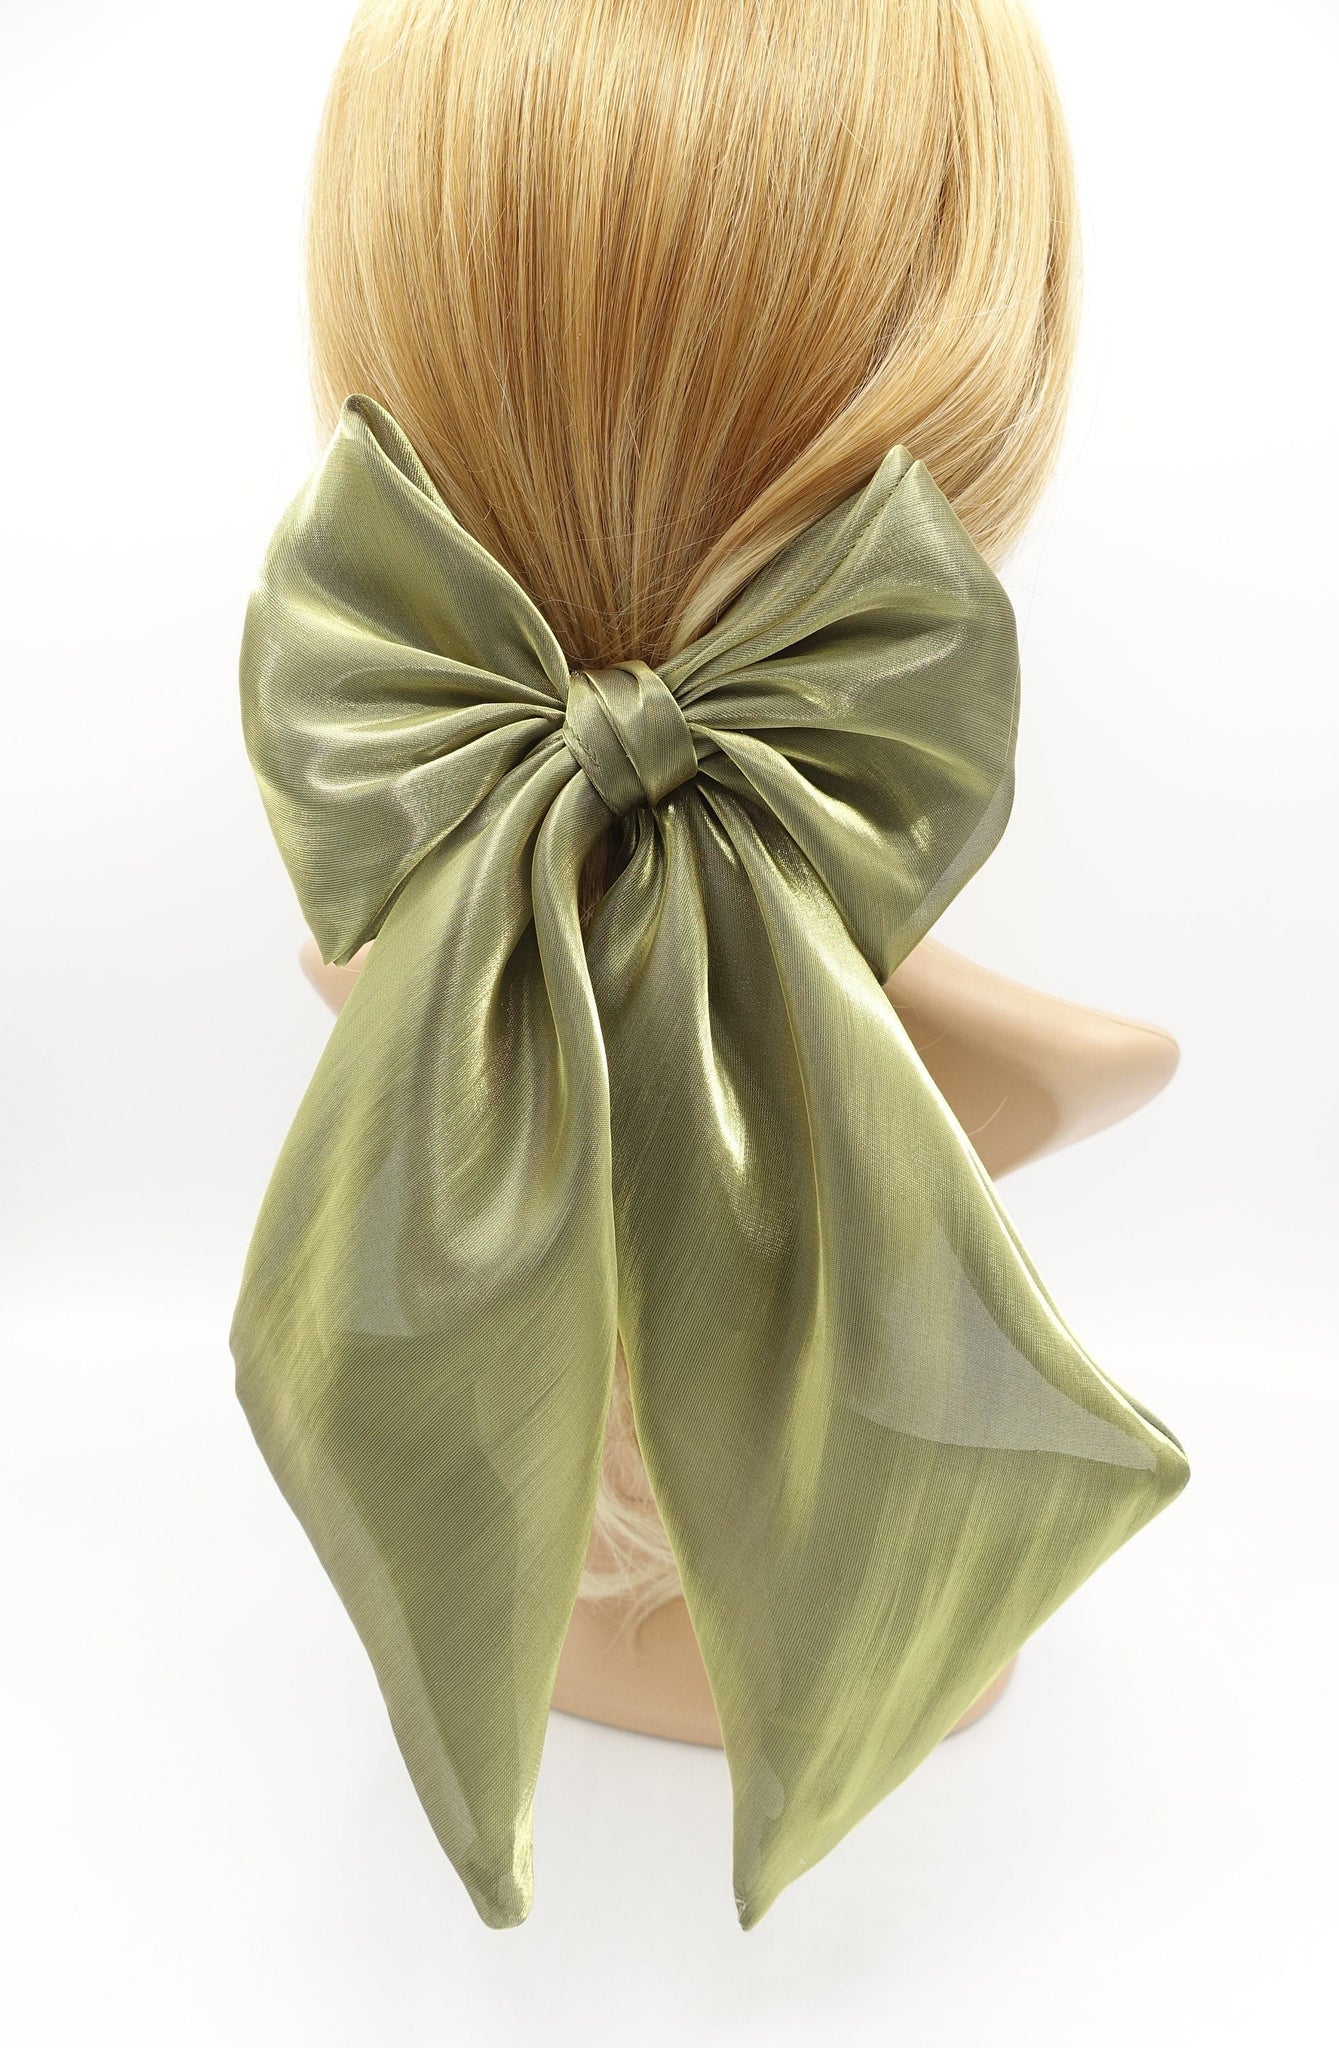 veryshine.com organza giant hair bow wide tail oversized hair accessory for women